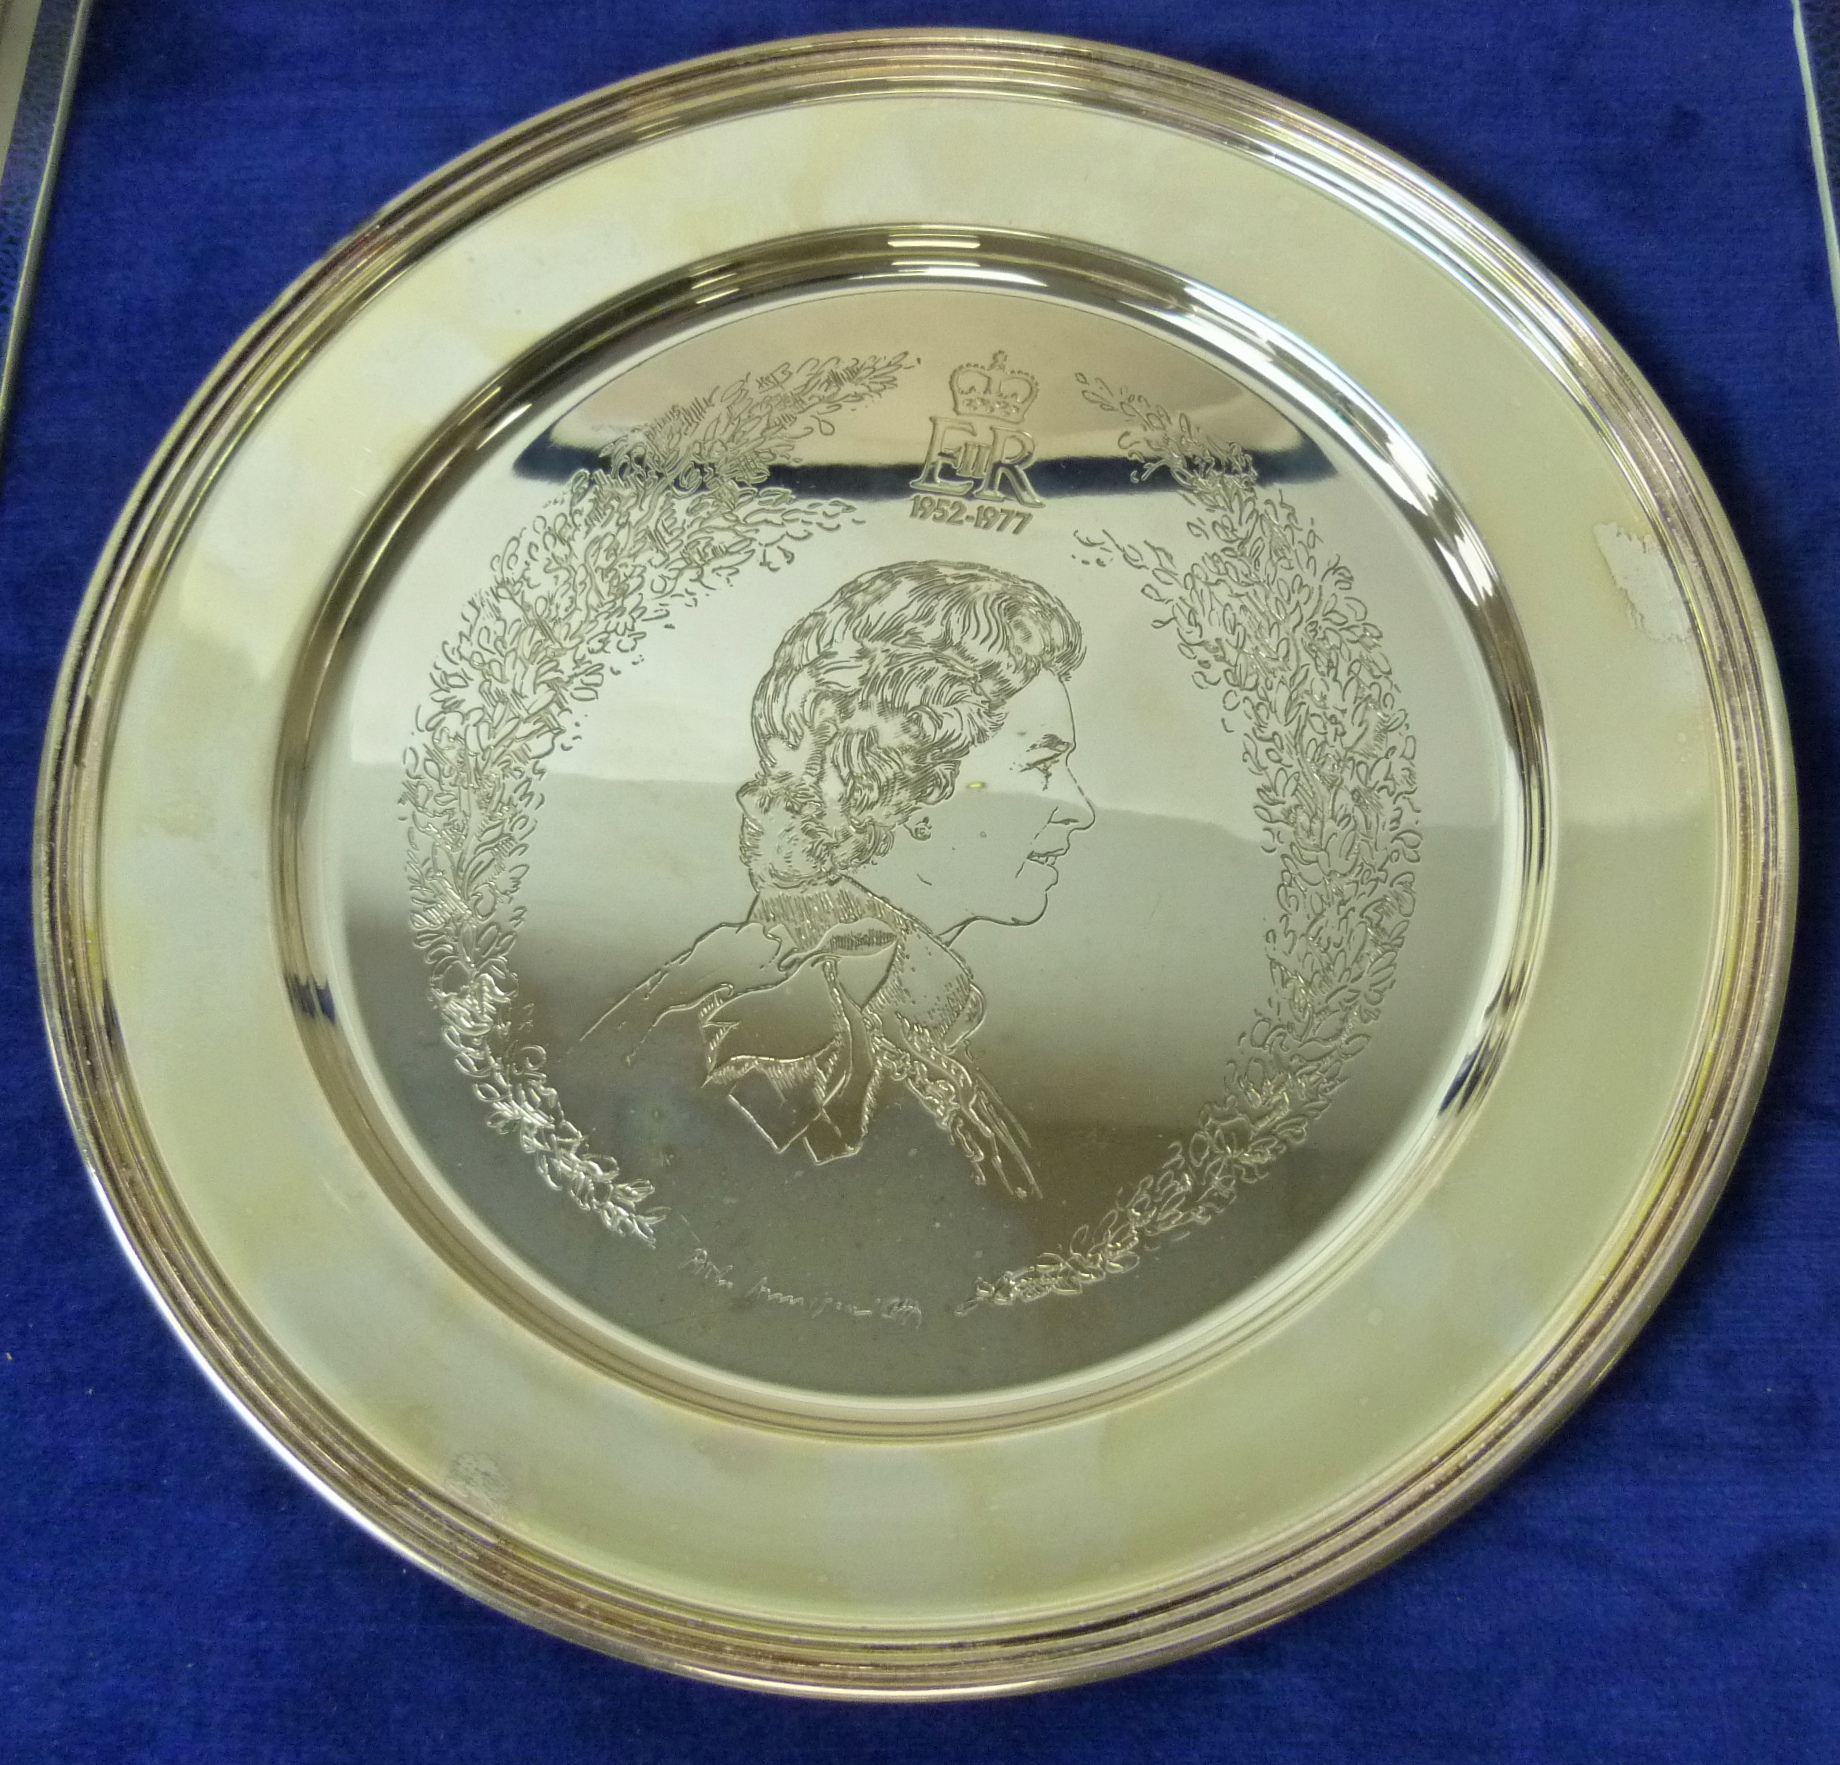 Seven silver Royal Commemorative ltd. ed. dishes, some after Annigoni, cased with certificates. - Image 3 of 3